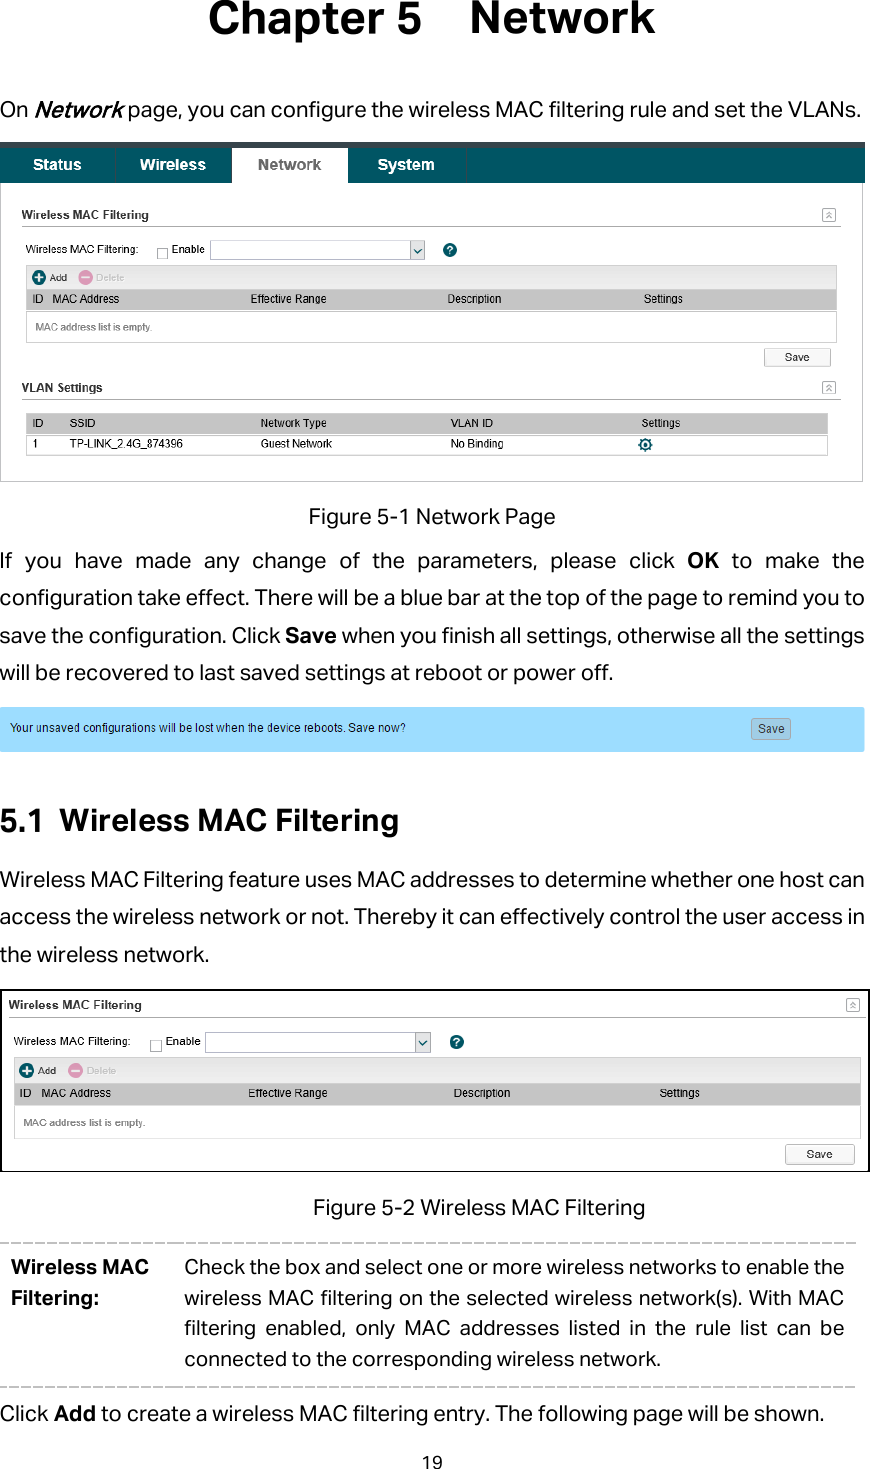  Network On Network page, you can configure the wireless MAC filtering rule and set the VLANs.  Figure 5-1 Network Page If you have made any change of the parameters, please click OK  to make the configuration take effect. There will be a blue bar at the top of the page to remind you to save the configuration. Click Save when you finish all settings, otherwise all the settings will be recovered to last saved settings at reboot or power off.   Wireless MAC Filtering Wireless MAC Filtering feature uses MAC addresses to determine whether one host can access the wireless network or not. Thereby it can effectively control the user access in the wireless network.  Figure 5-2 Wireless MAC Filtering Wireless MAC Filtering: Check the box and select one or more wireless networks to enable the wireless MAC filtering on the selected wireless network(s). With MAC filtering enabled, only MAC addresses listed in the rule list can be connected to the corresponding wireless network. Click Add to create a wireless MAC filtering entry. The following page will be shown. 19 